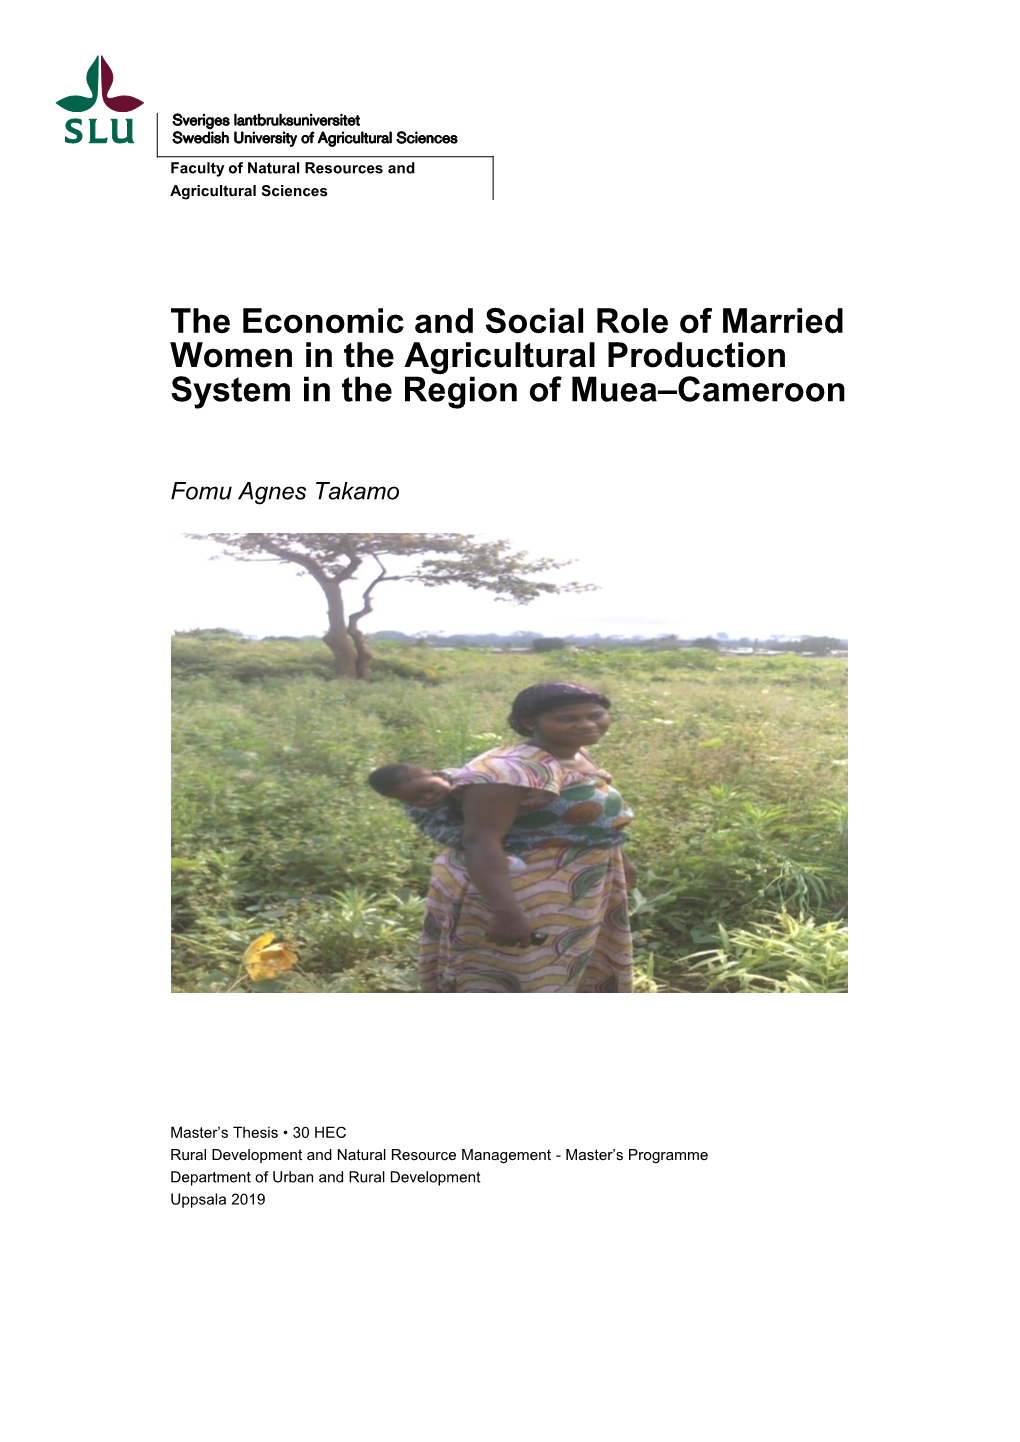 The Economic and Social Role of Married Women in the Agricultural Production System in the Region of Muea–Cameroon